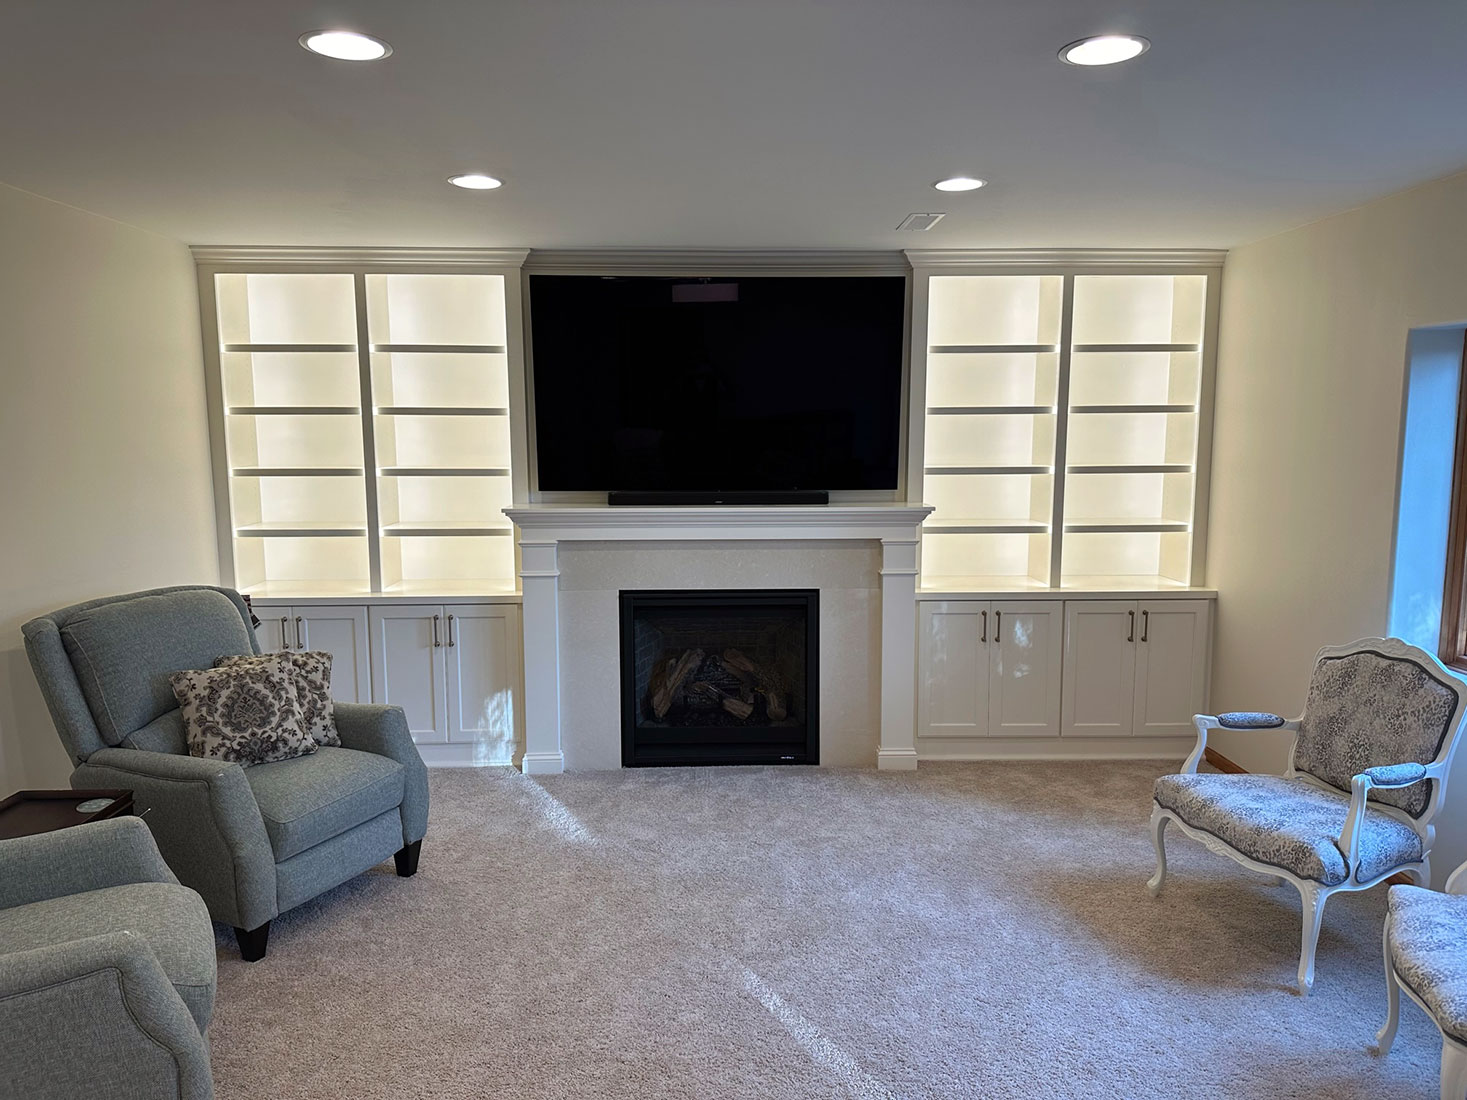 Large light up white bookshelves and custom built cabinets surrounding a traditional fireplace and mantels, built by Carter Custom Construction